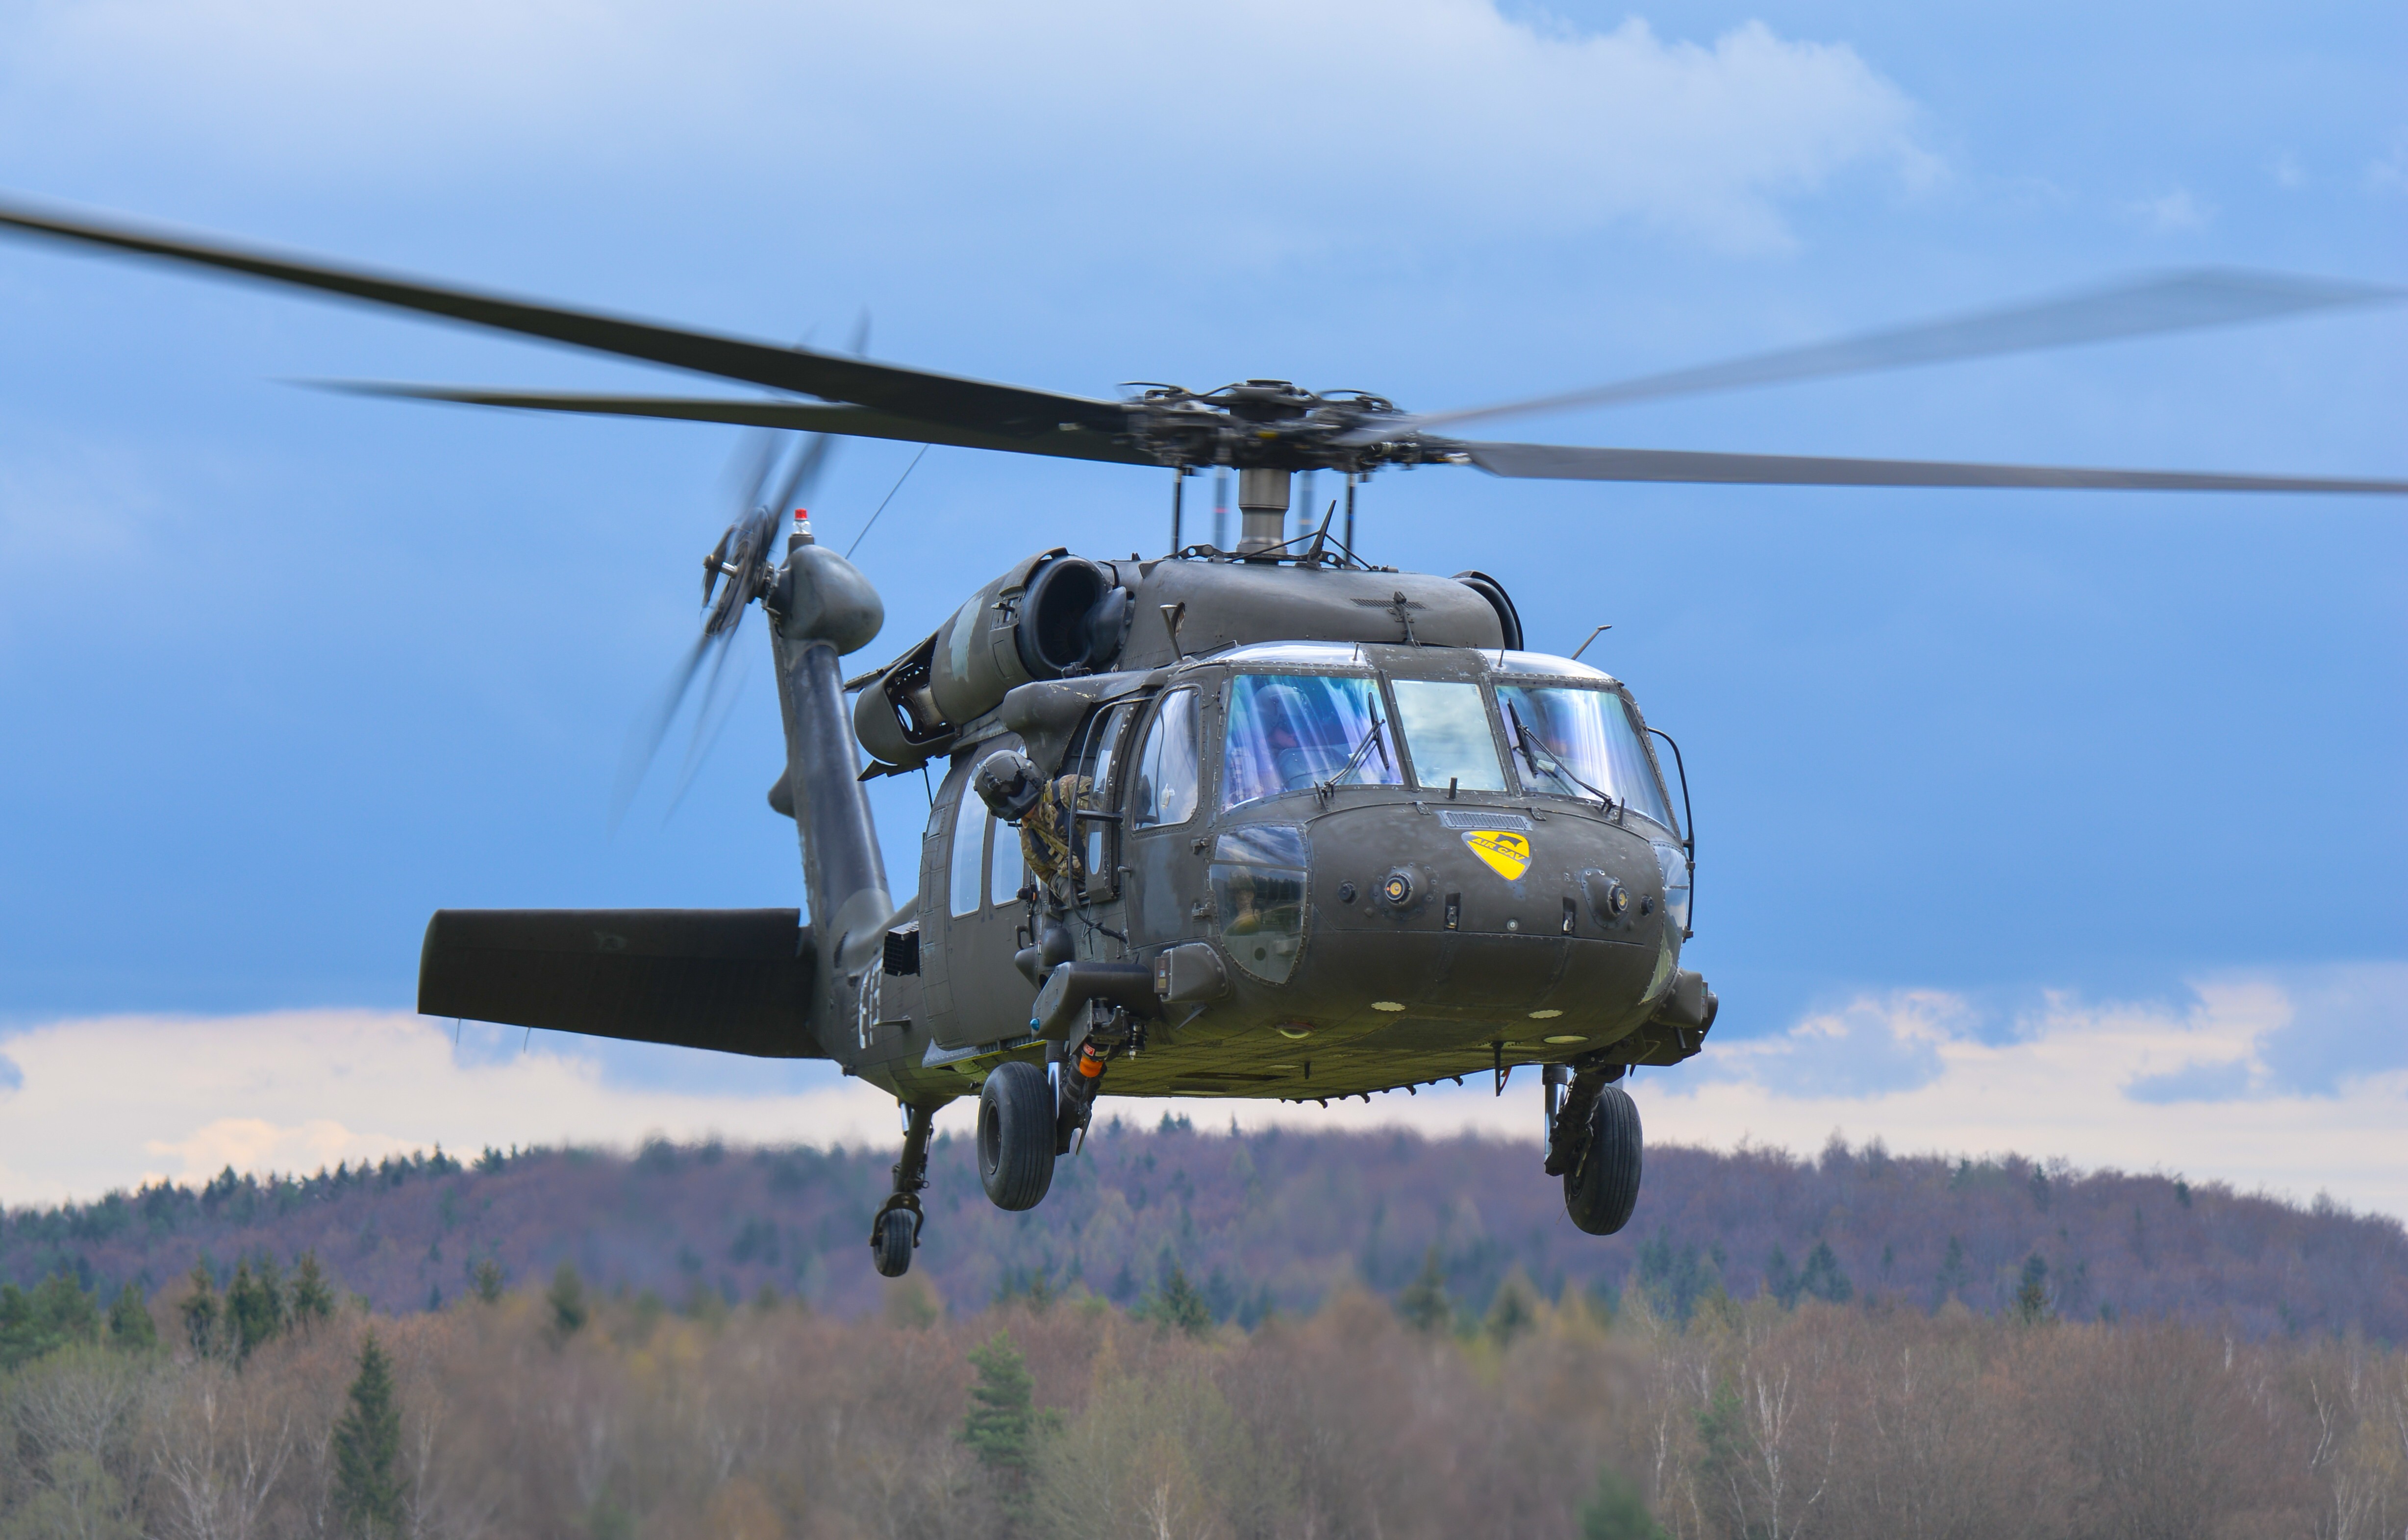 40 years of aviation service The Black Hawk helicopter Article The